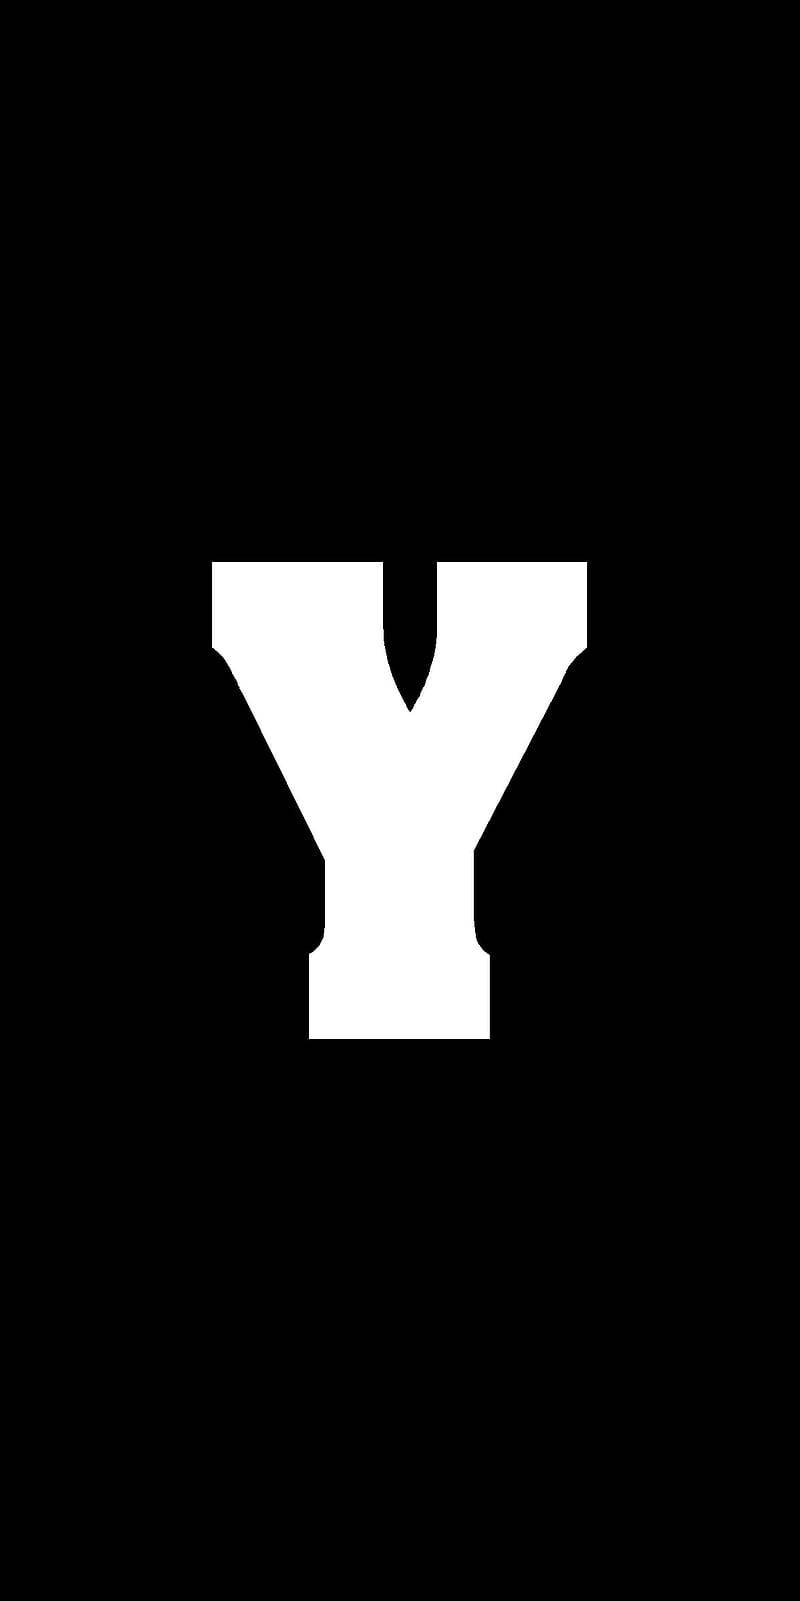 Captivating Letter Y In White On Black Background